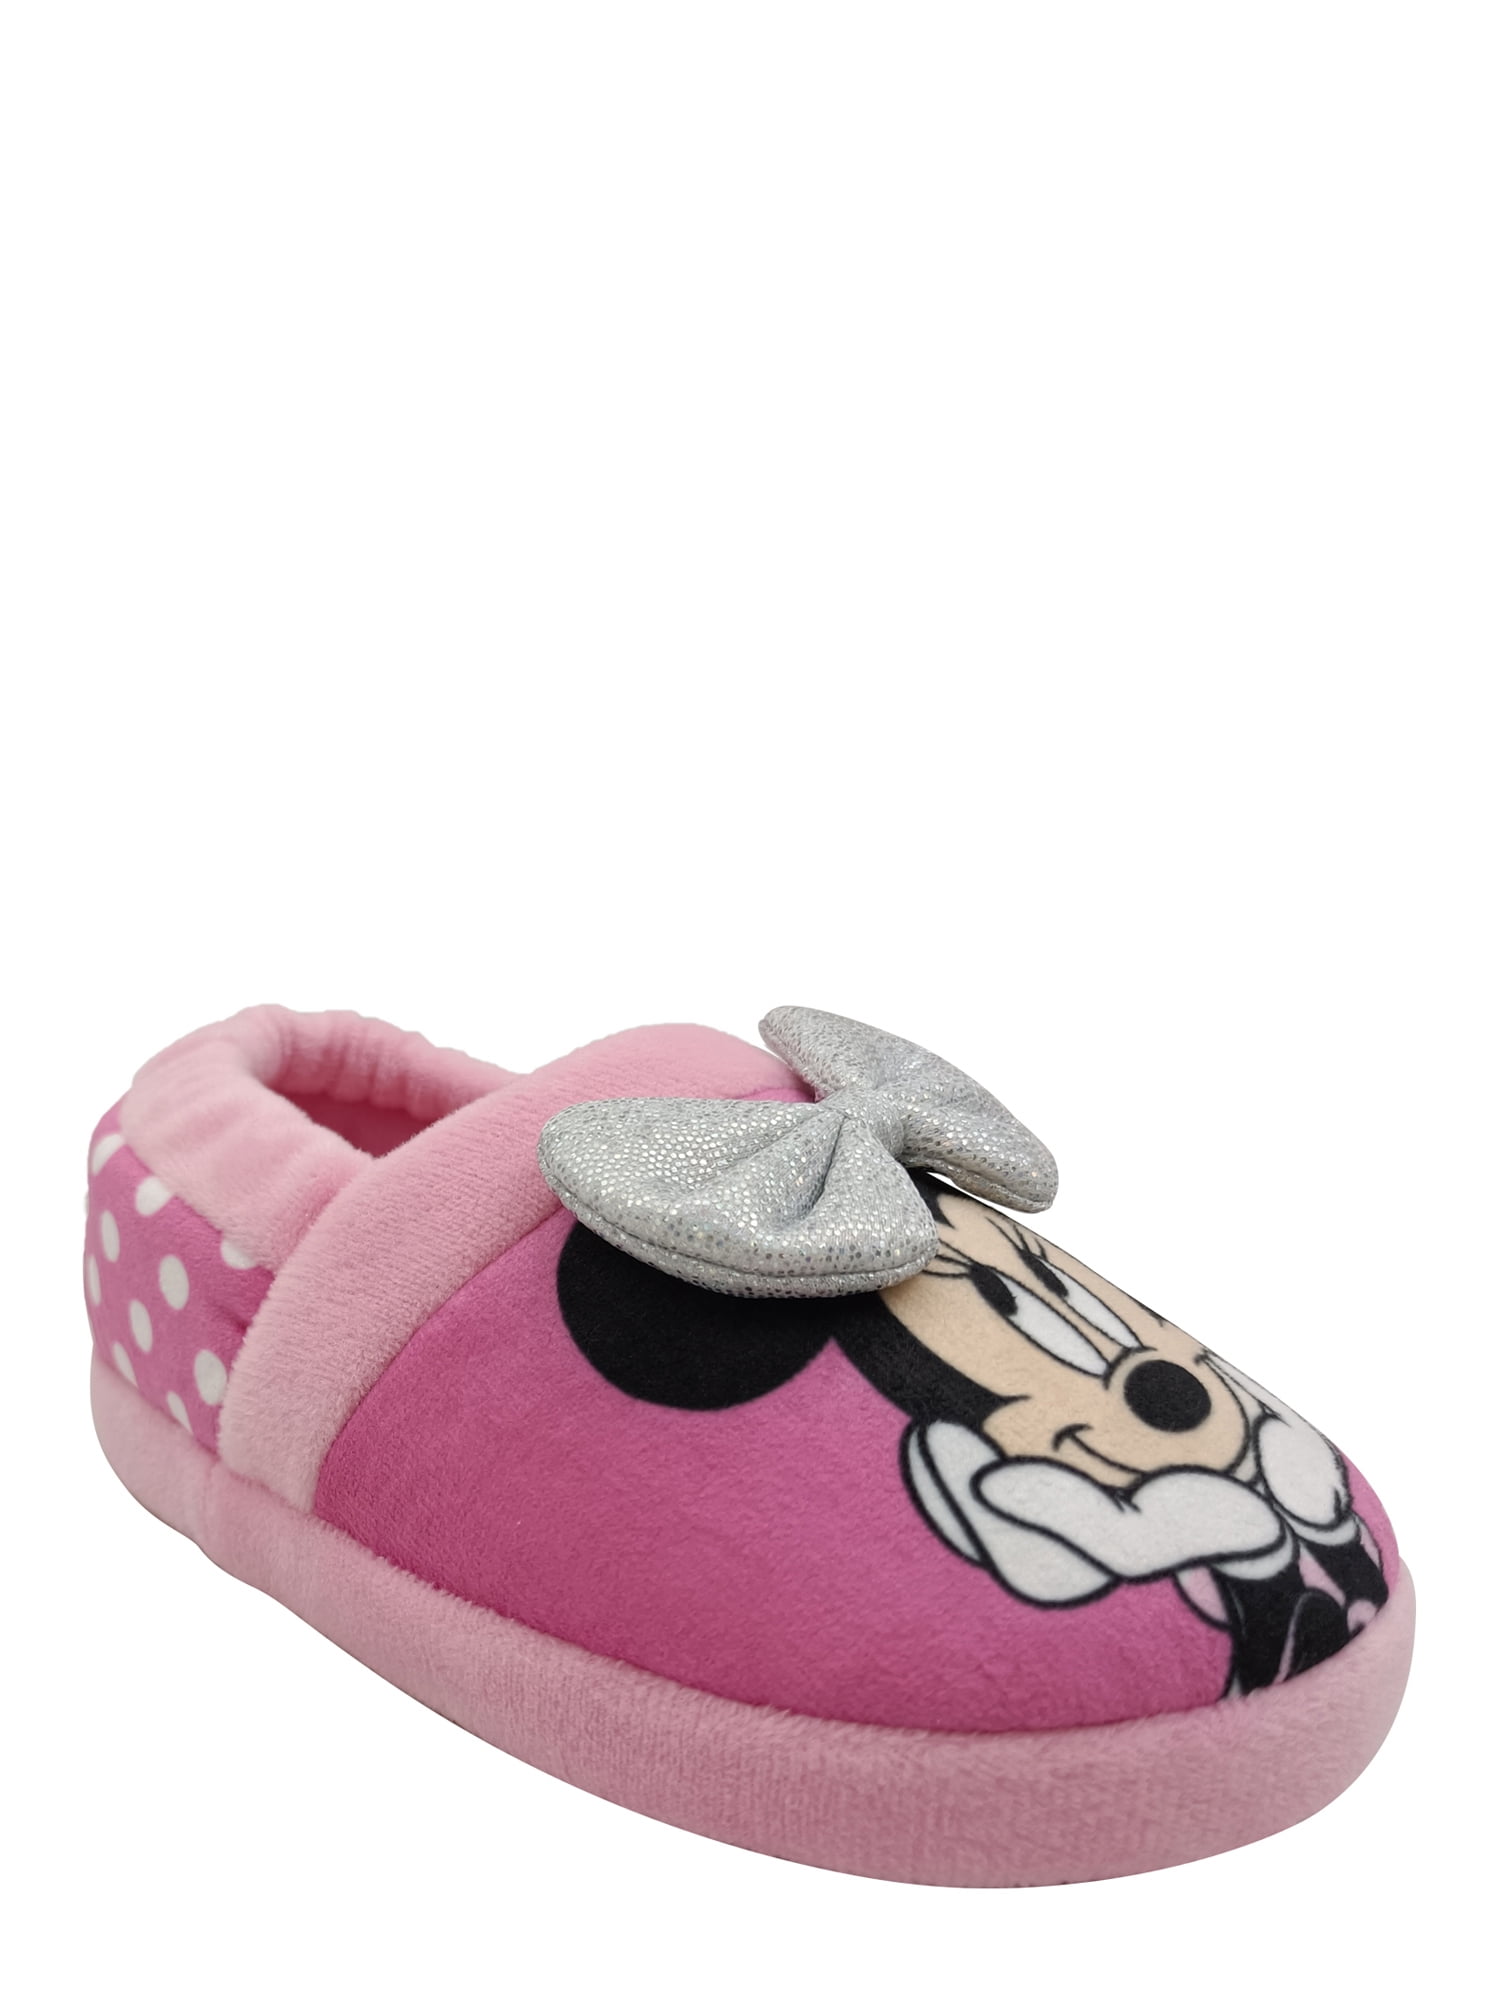 Disney Minnie Mouse Pink Rubber Sole High Top Slippers Girl Sz 11 12 NWT Bow Ear 